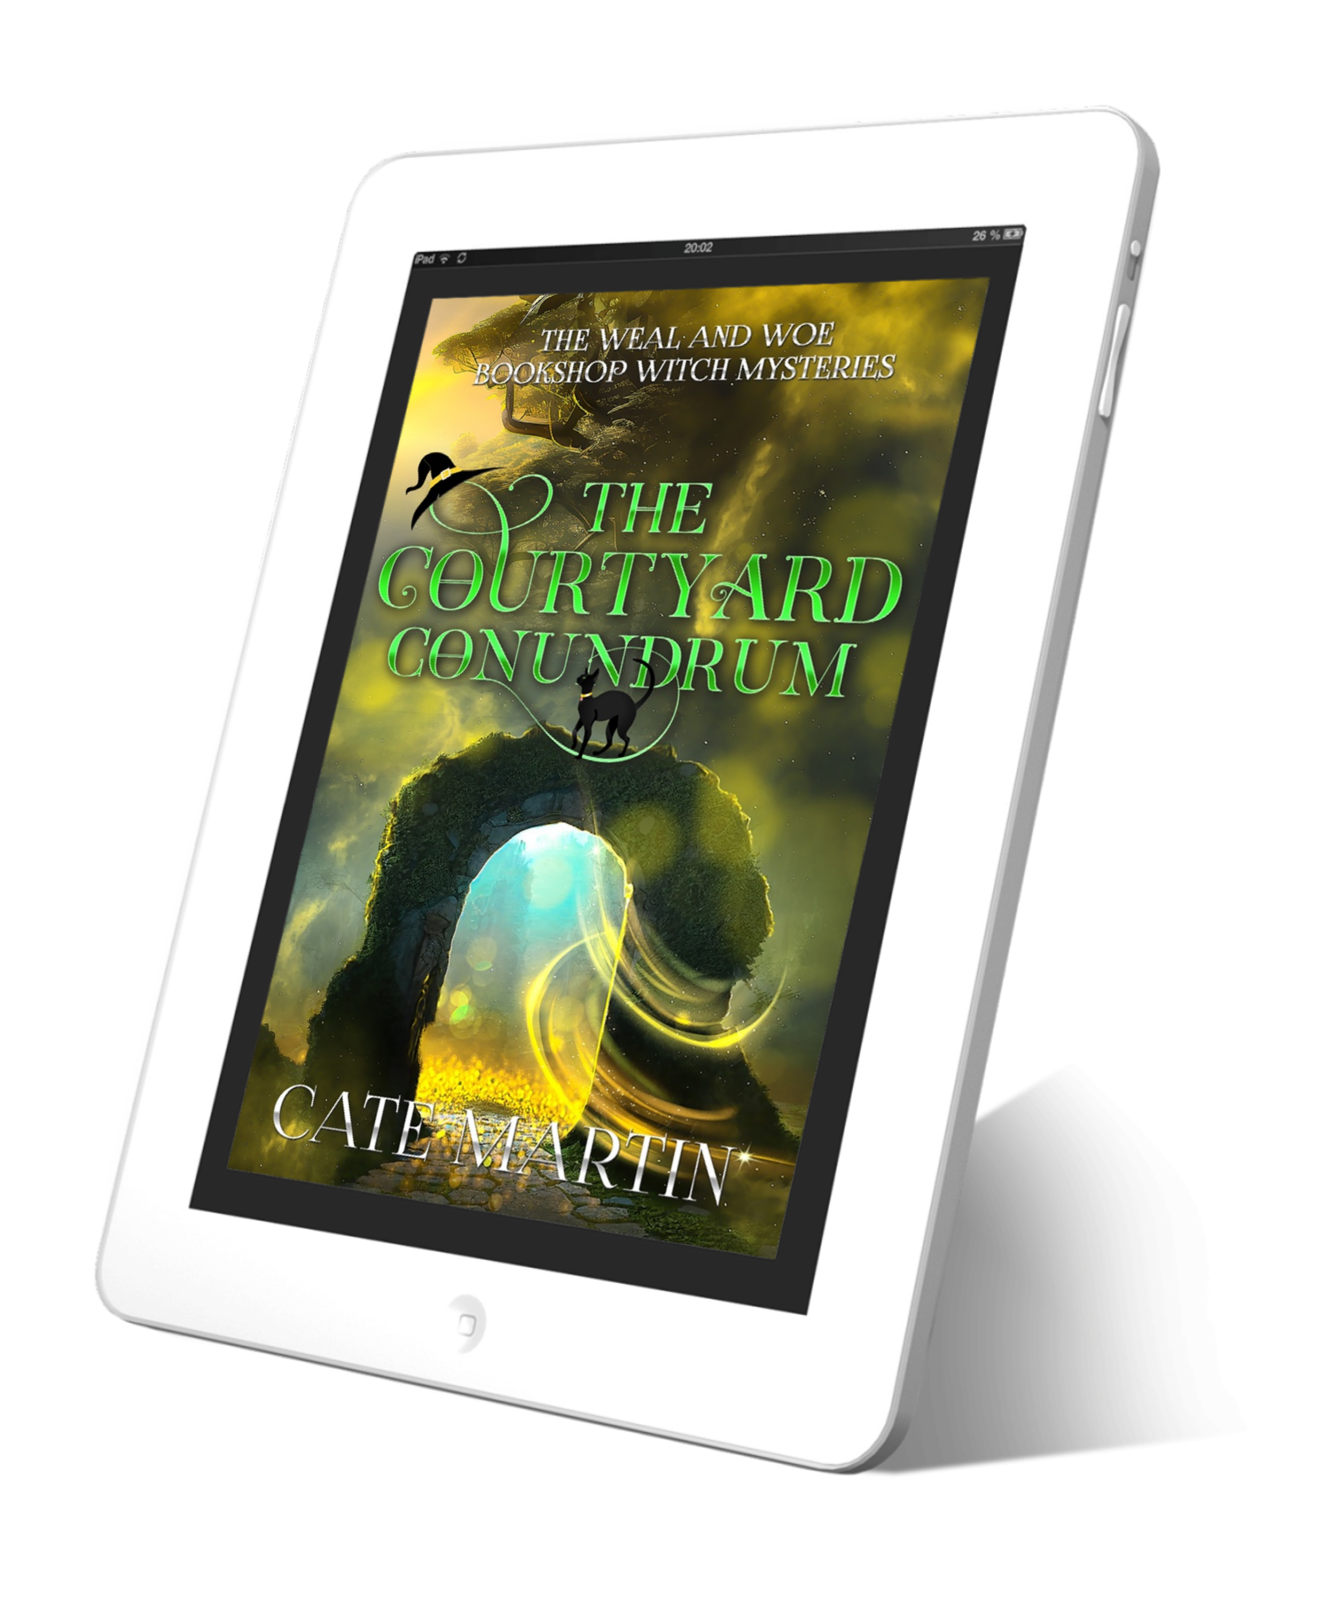 Book cover for the ebook of The Courtyard Conundrum, book 6 in the Weal & Woe Bookshop Witch Mysteries.